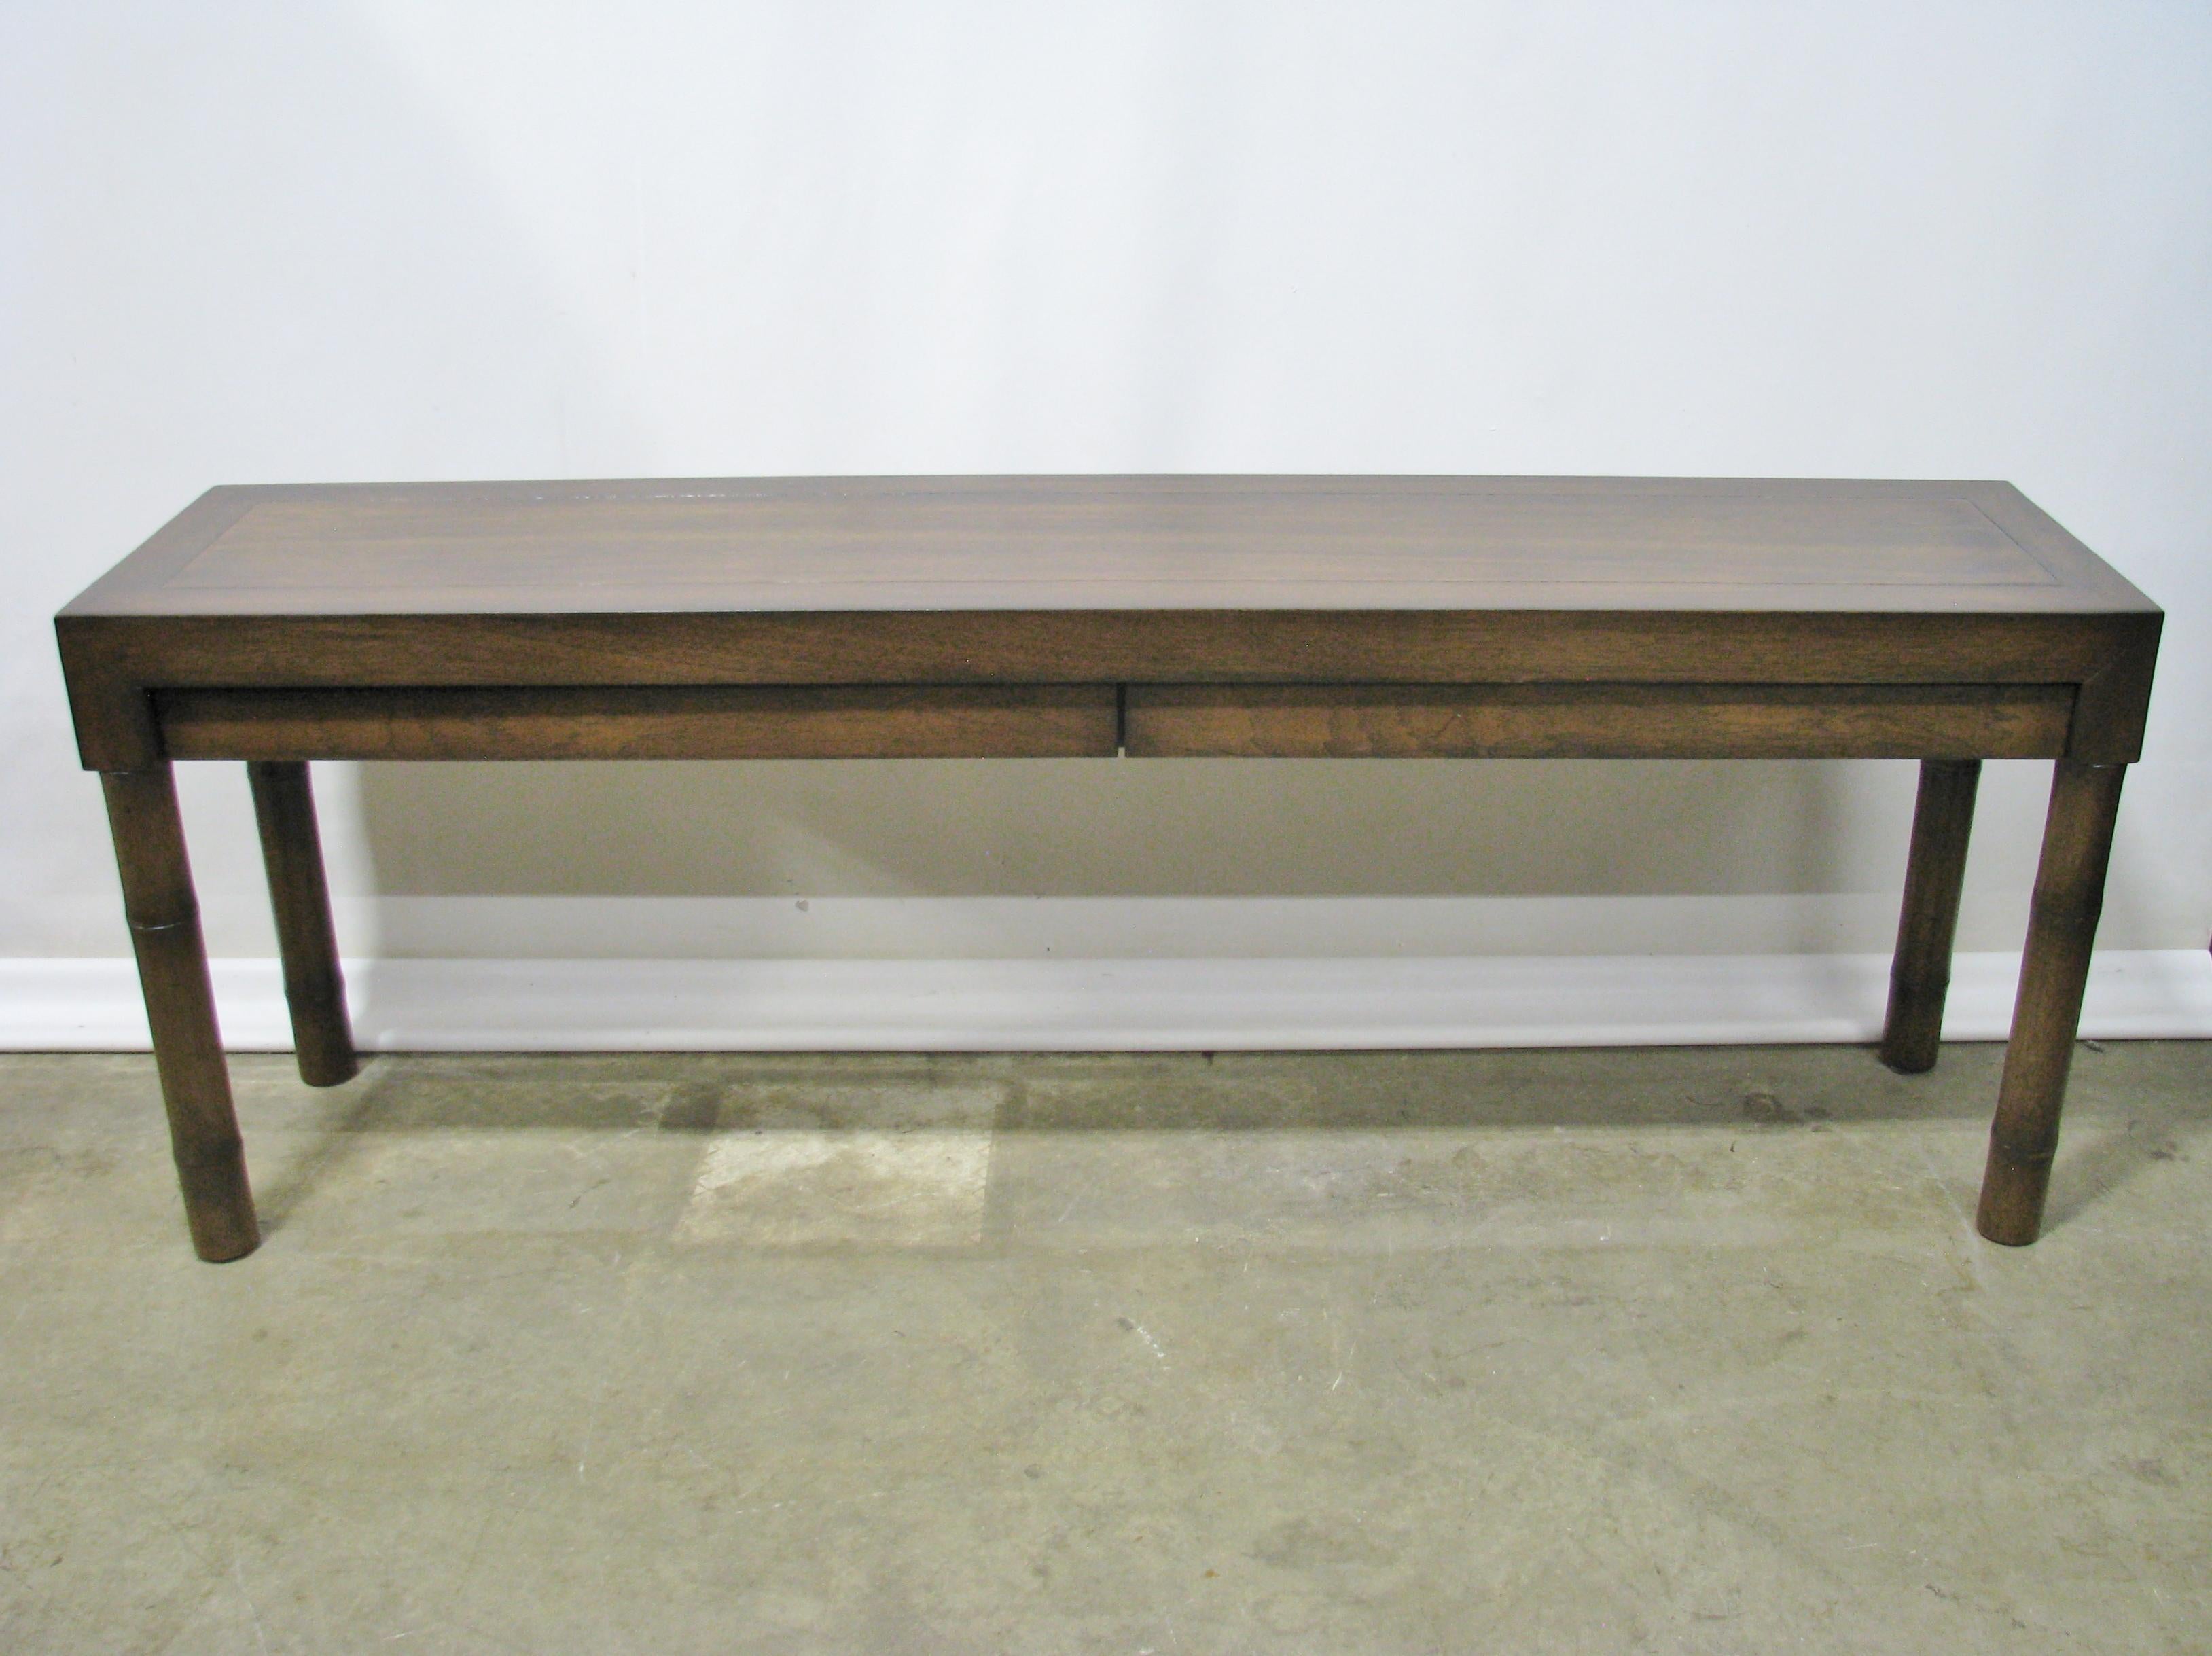 Striking and stylish Century Furniture 1970s console/sofa table. A long rectangular top with a wide, 2.75